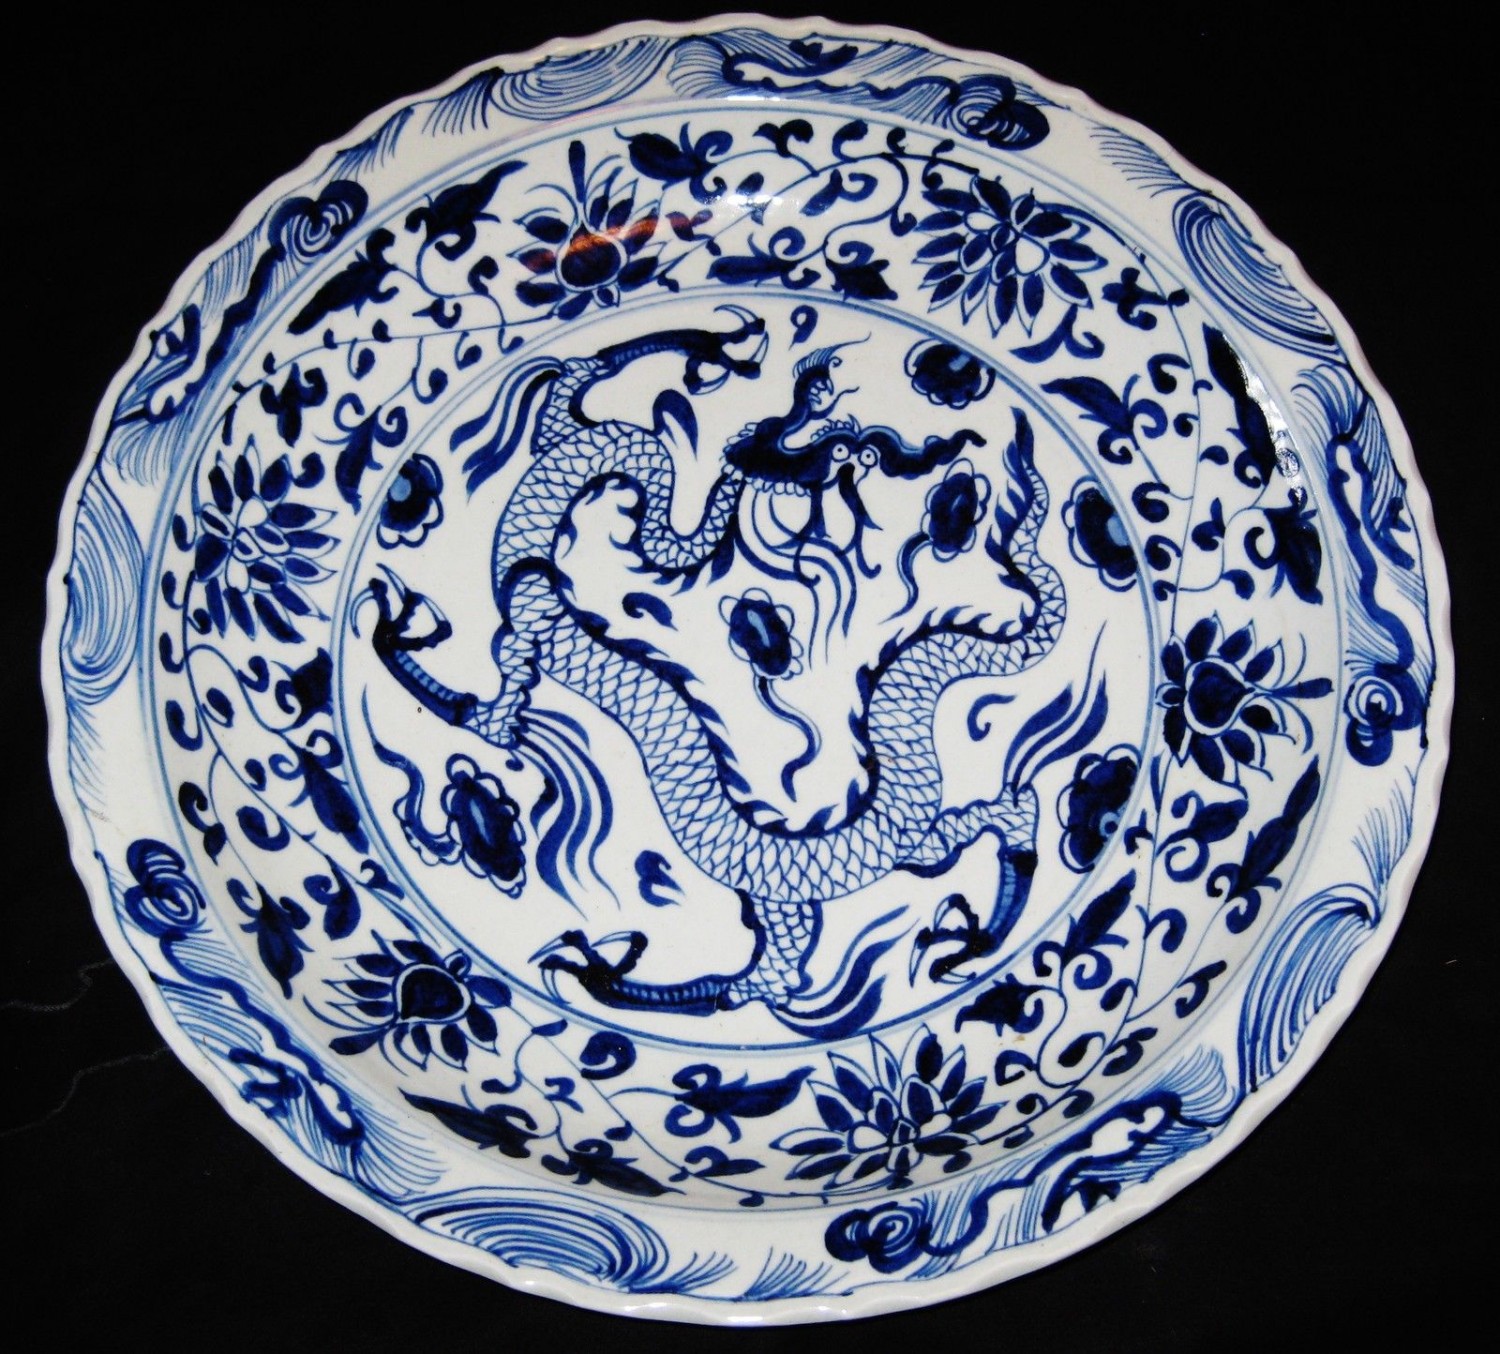 BIG ANTIQUE CHINESE DRAGON PORCELAIN, 43CM B&W CHARGER,19TH C, XUANDE MARK.